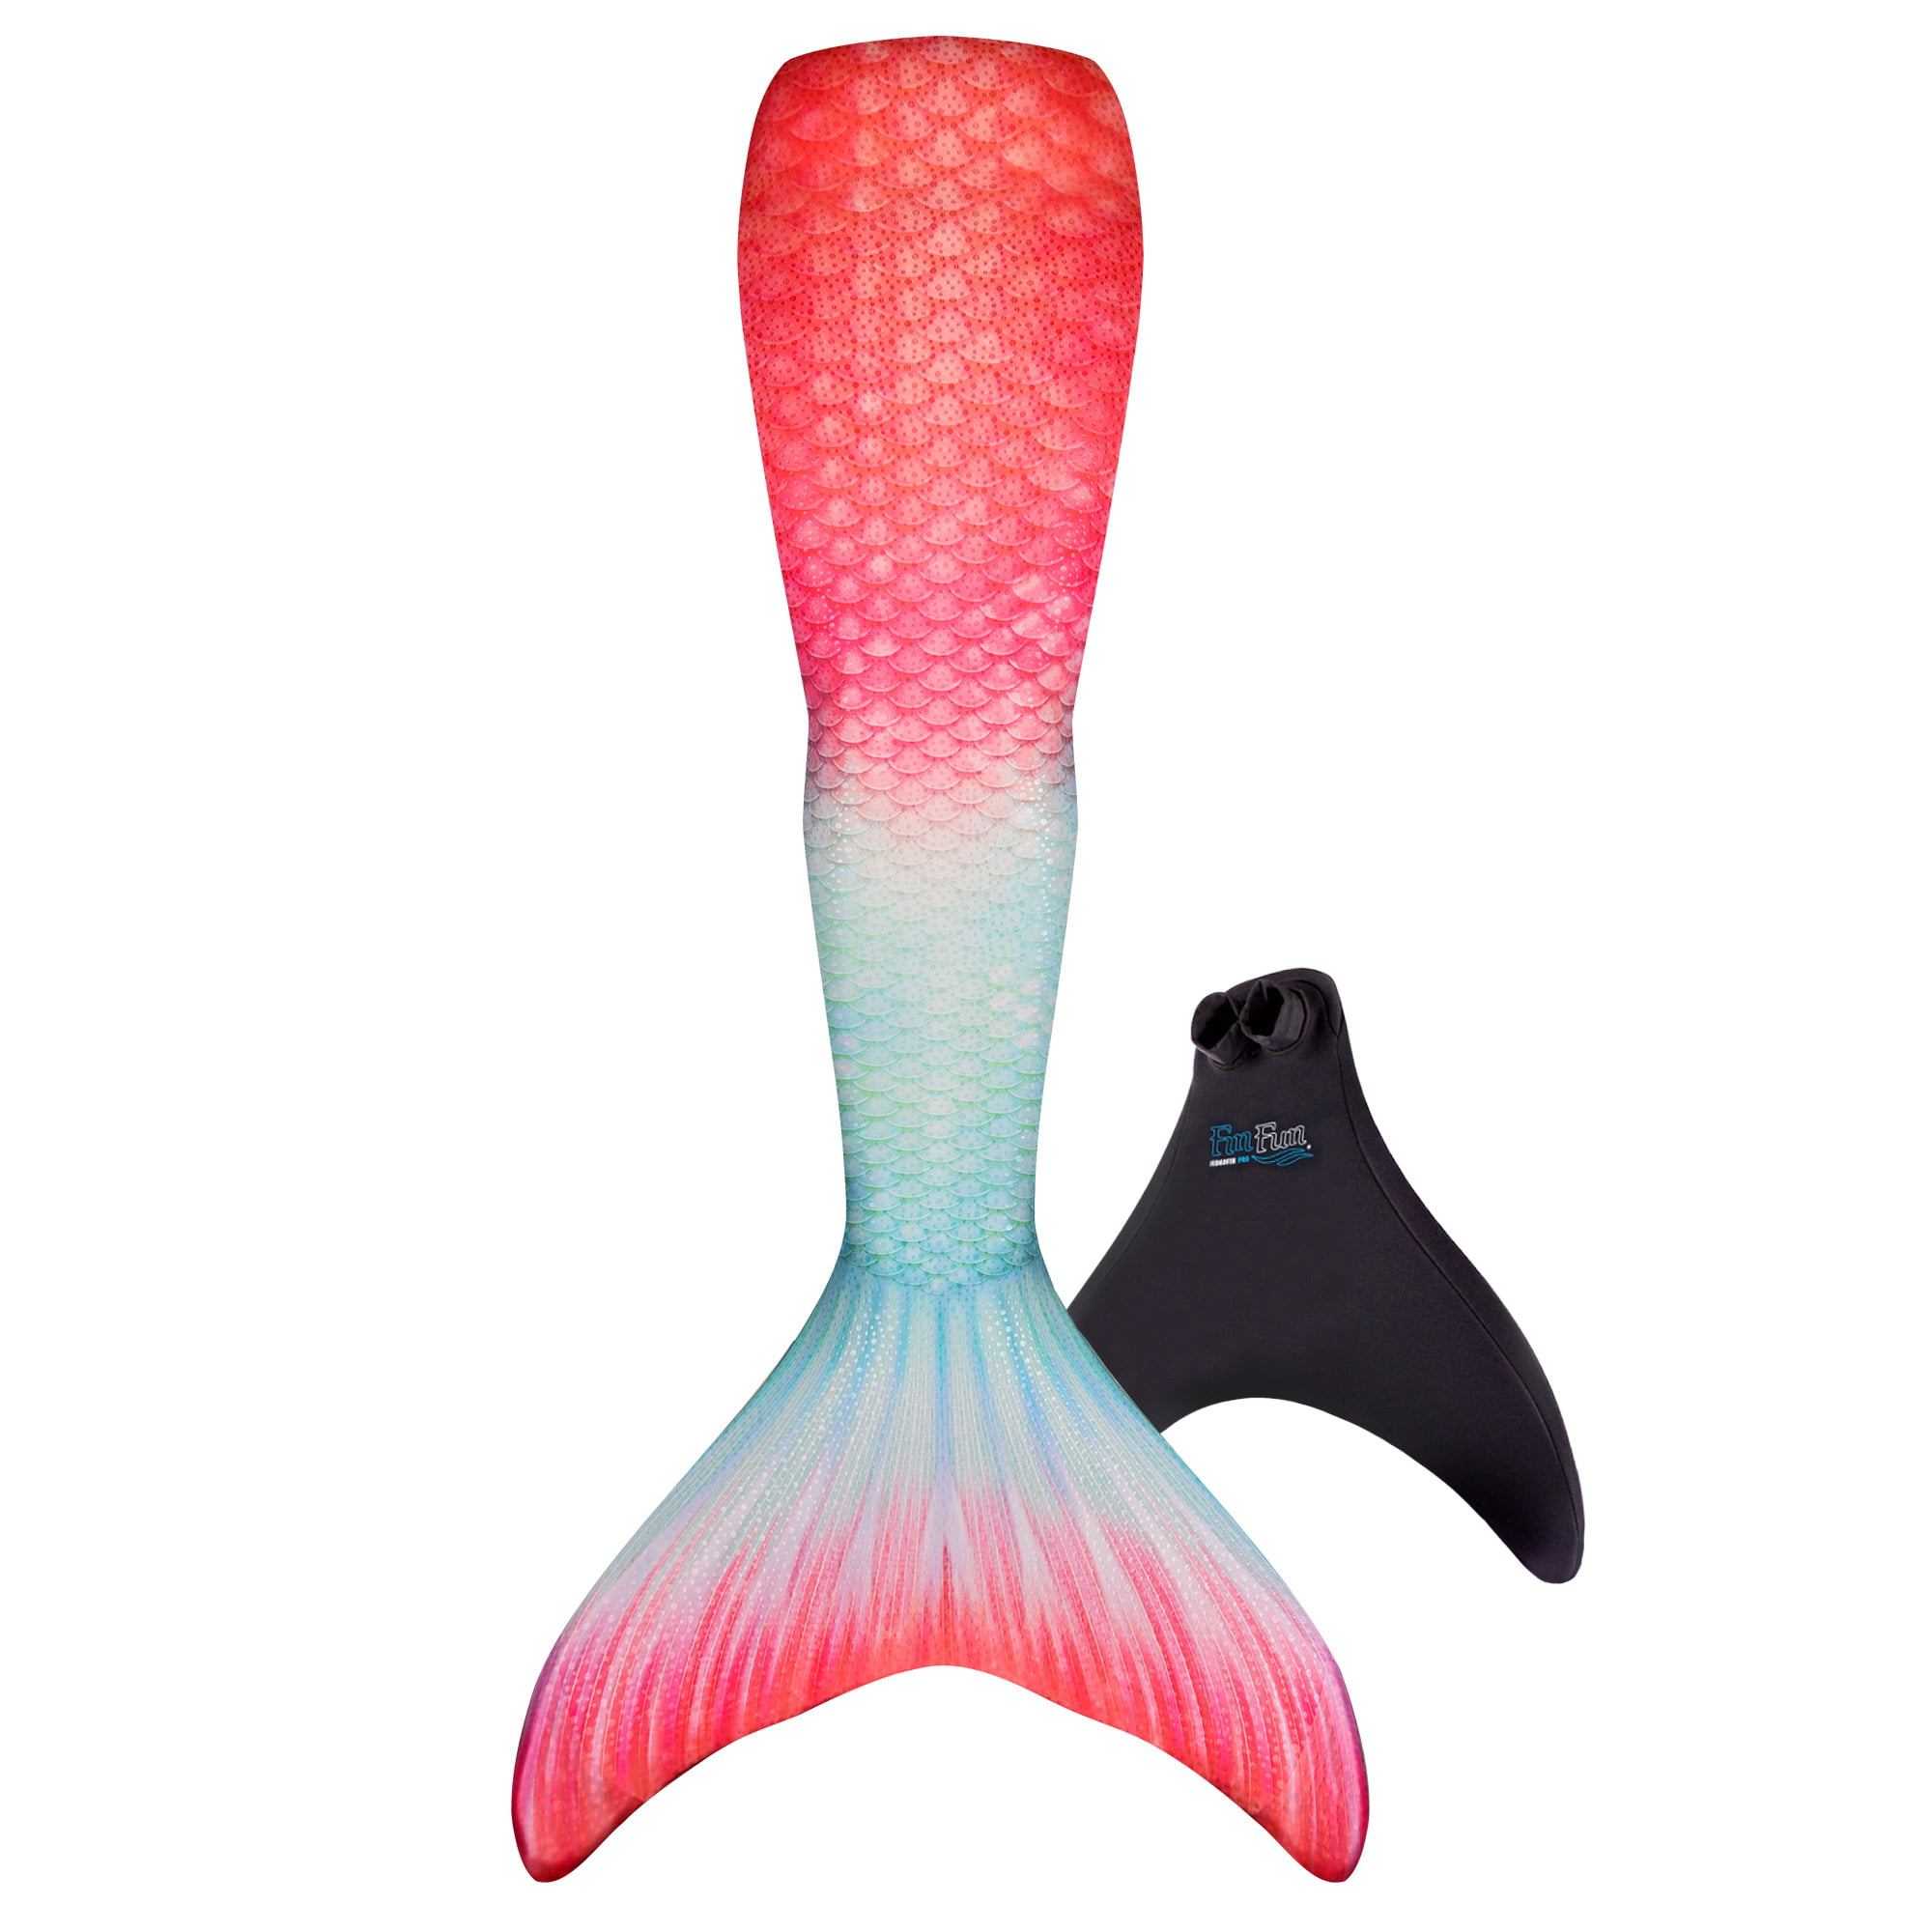 Swimming Kids Adults Mermaid Diving Monofin Swimmable Tails Fin Q4P1 Traini Q9S0 